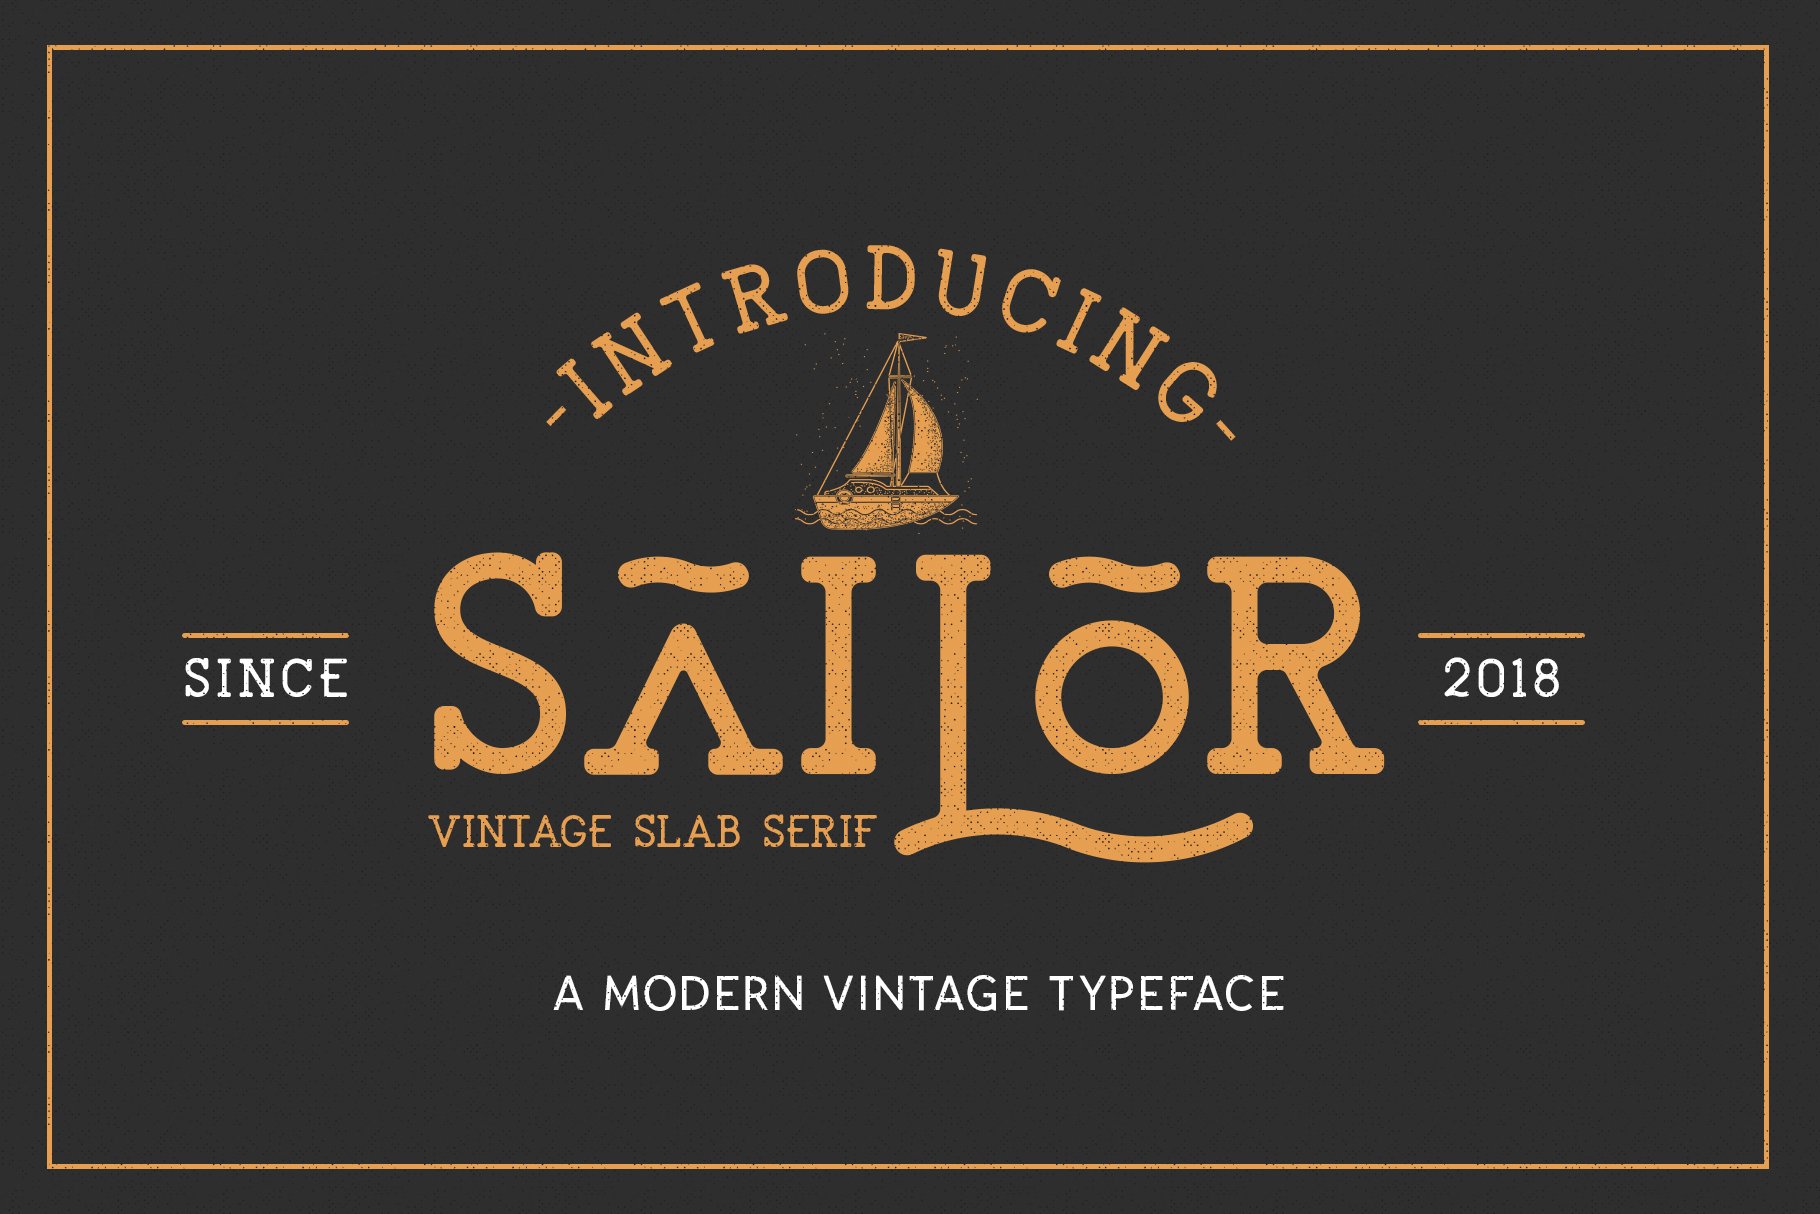 The Sailor Typeface cover image.